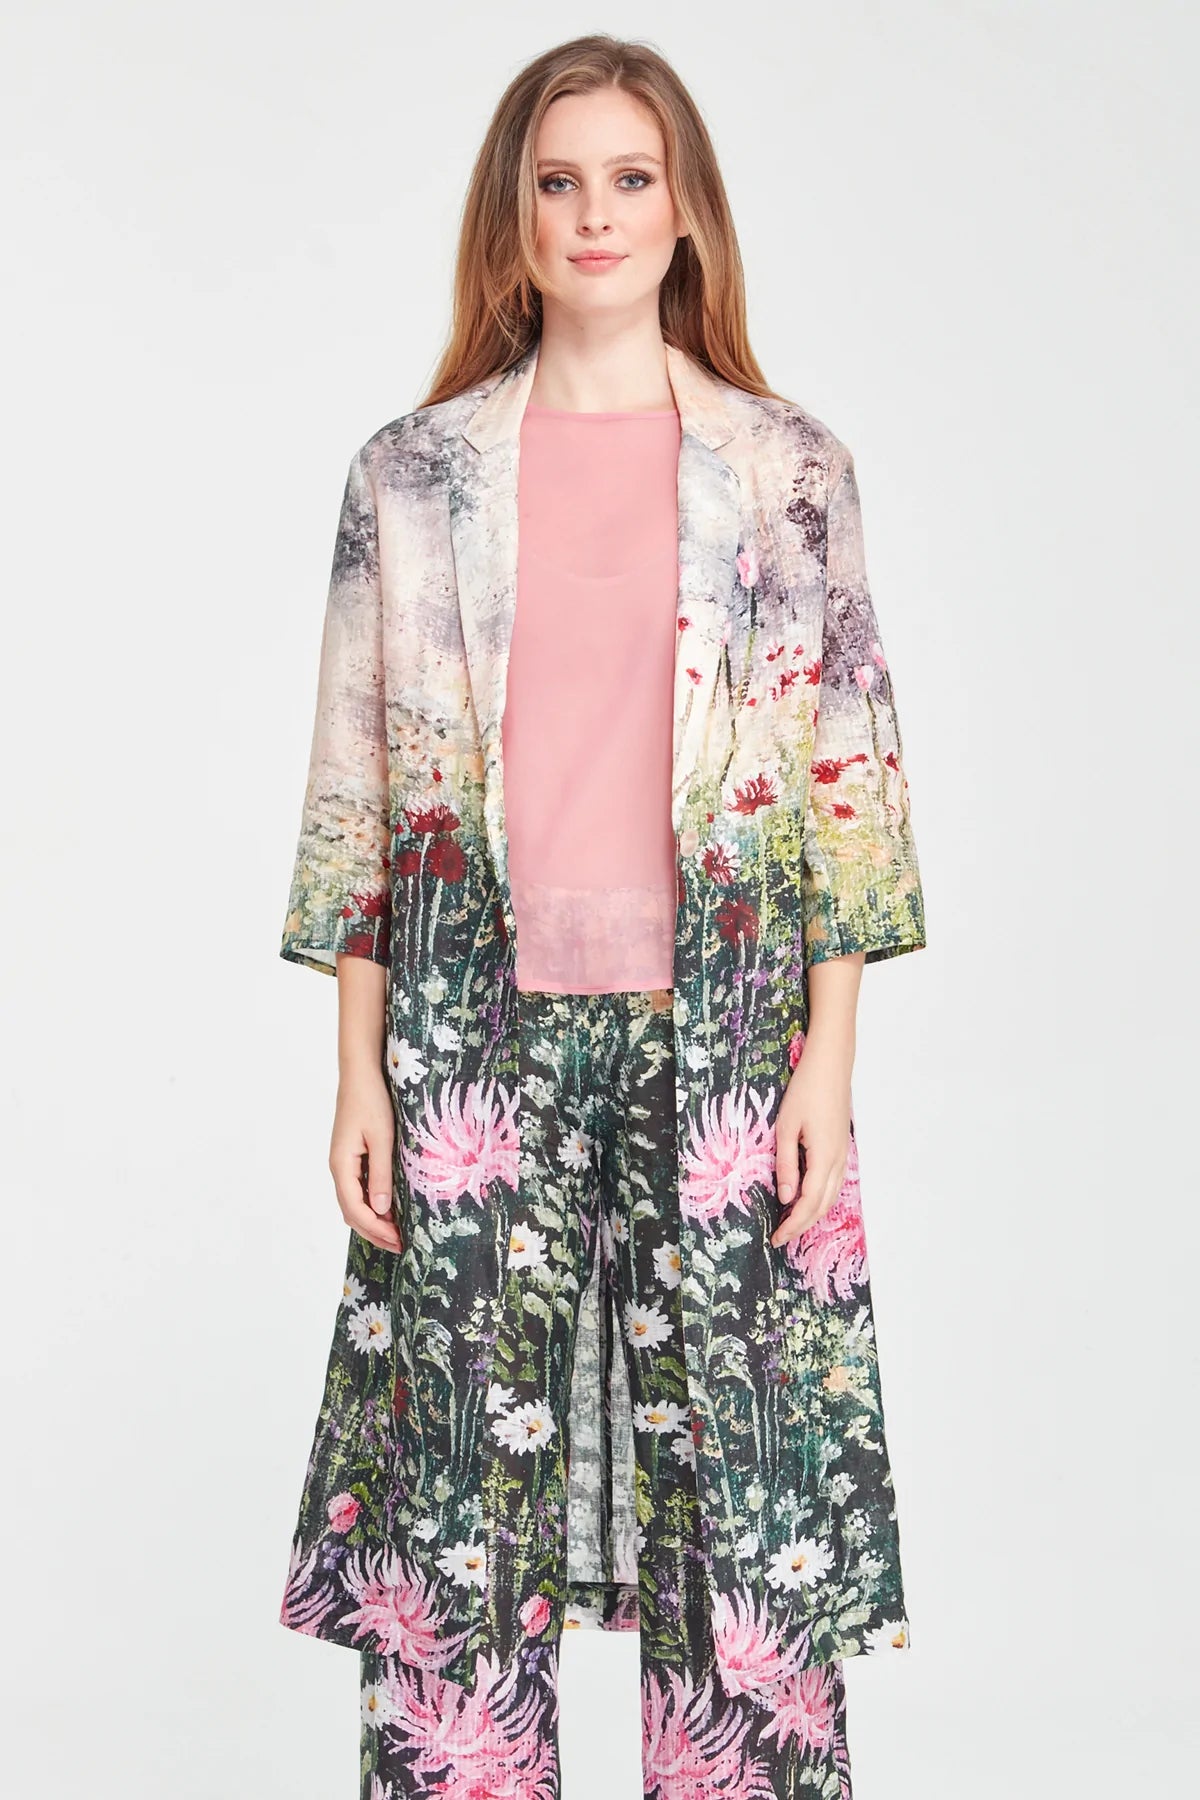 Curate - Star Duster Coat Black Floral